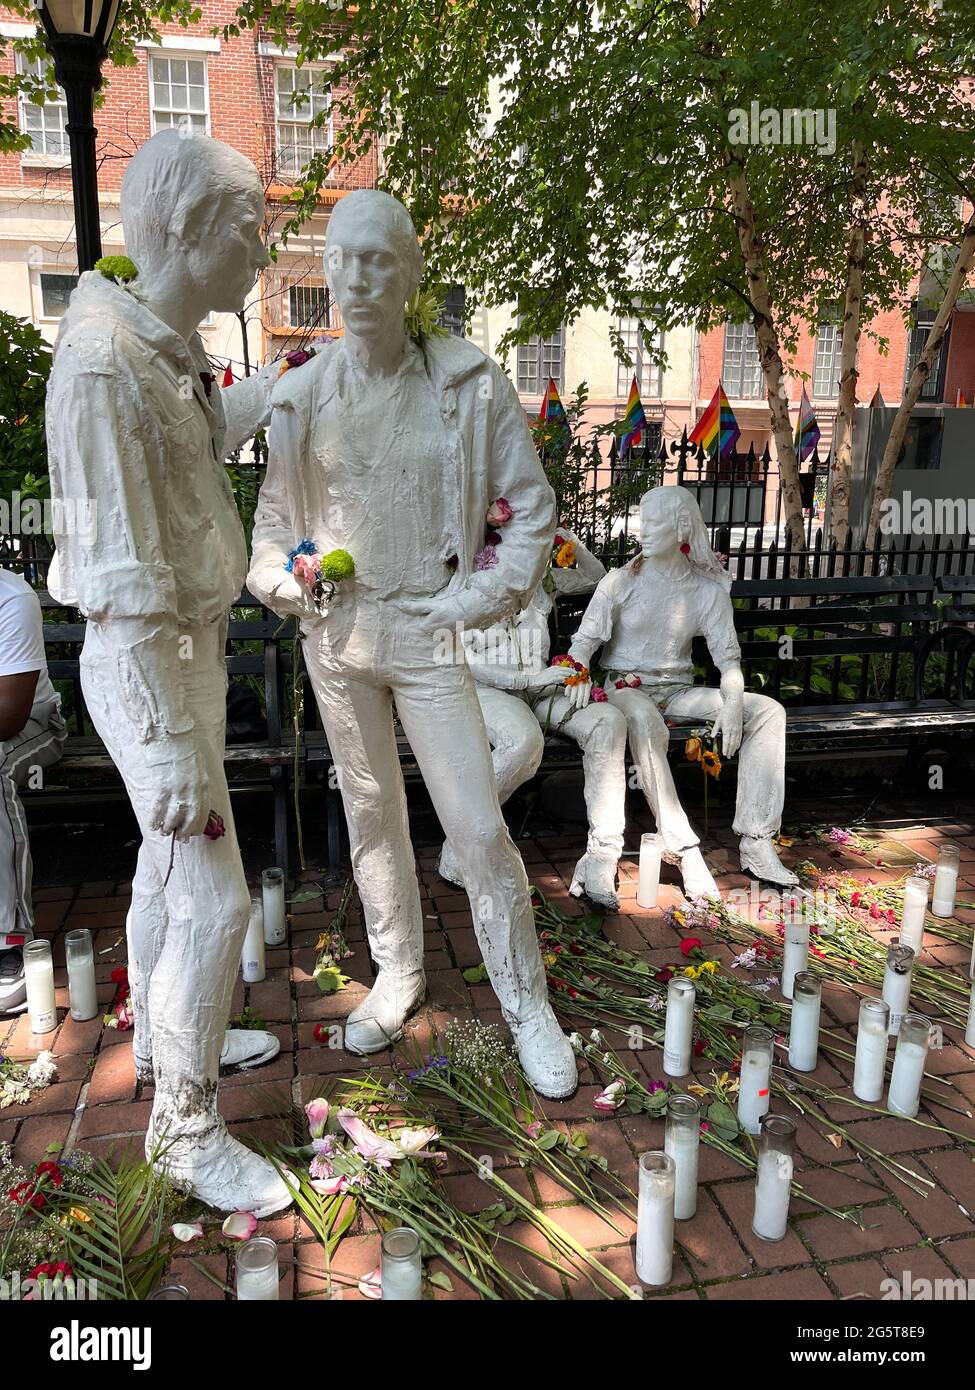 George Segal's The Gay Liberation statue is part of the Stonewall National Monument in Christopher Park across from the Stonewall Inn, New York, NY Stock Photo